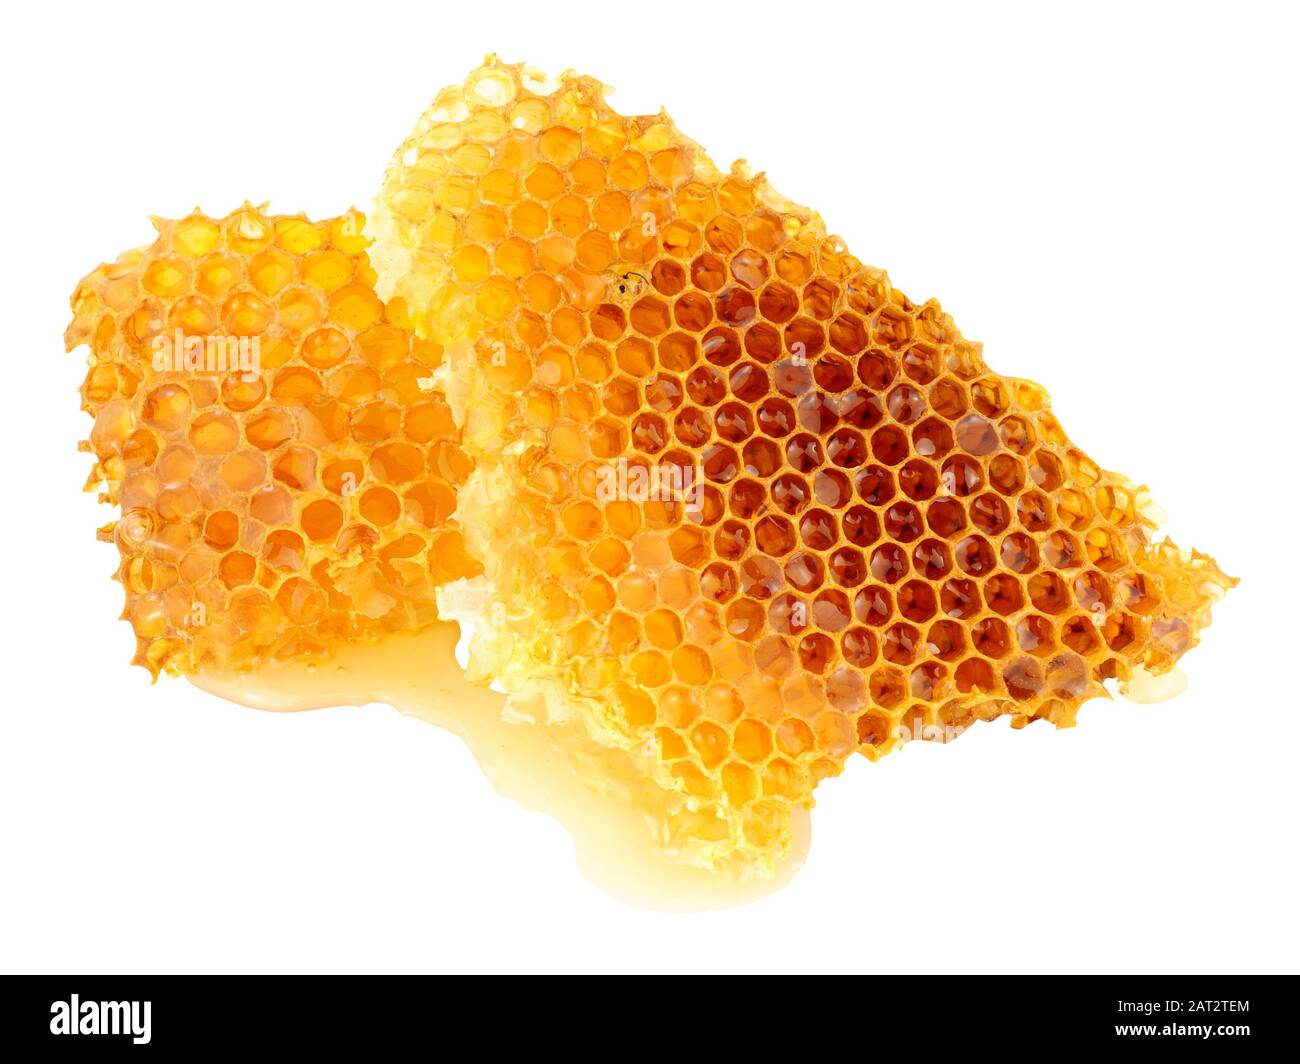 Honey bee wax honeycomb cells with honey isolated on a white